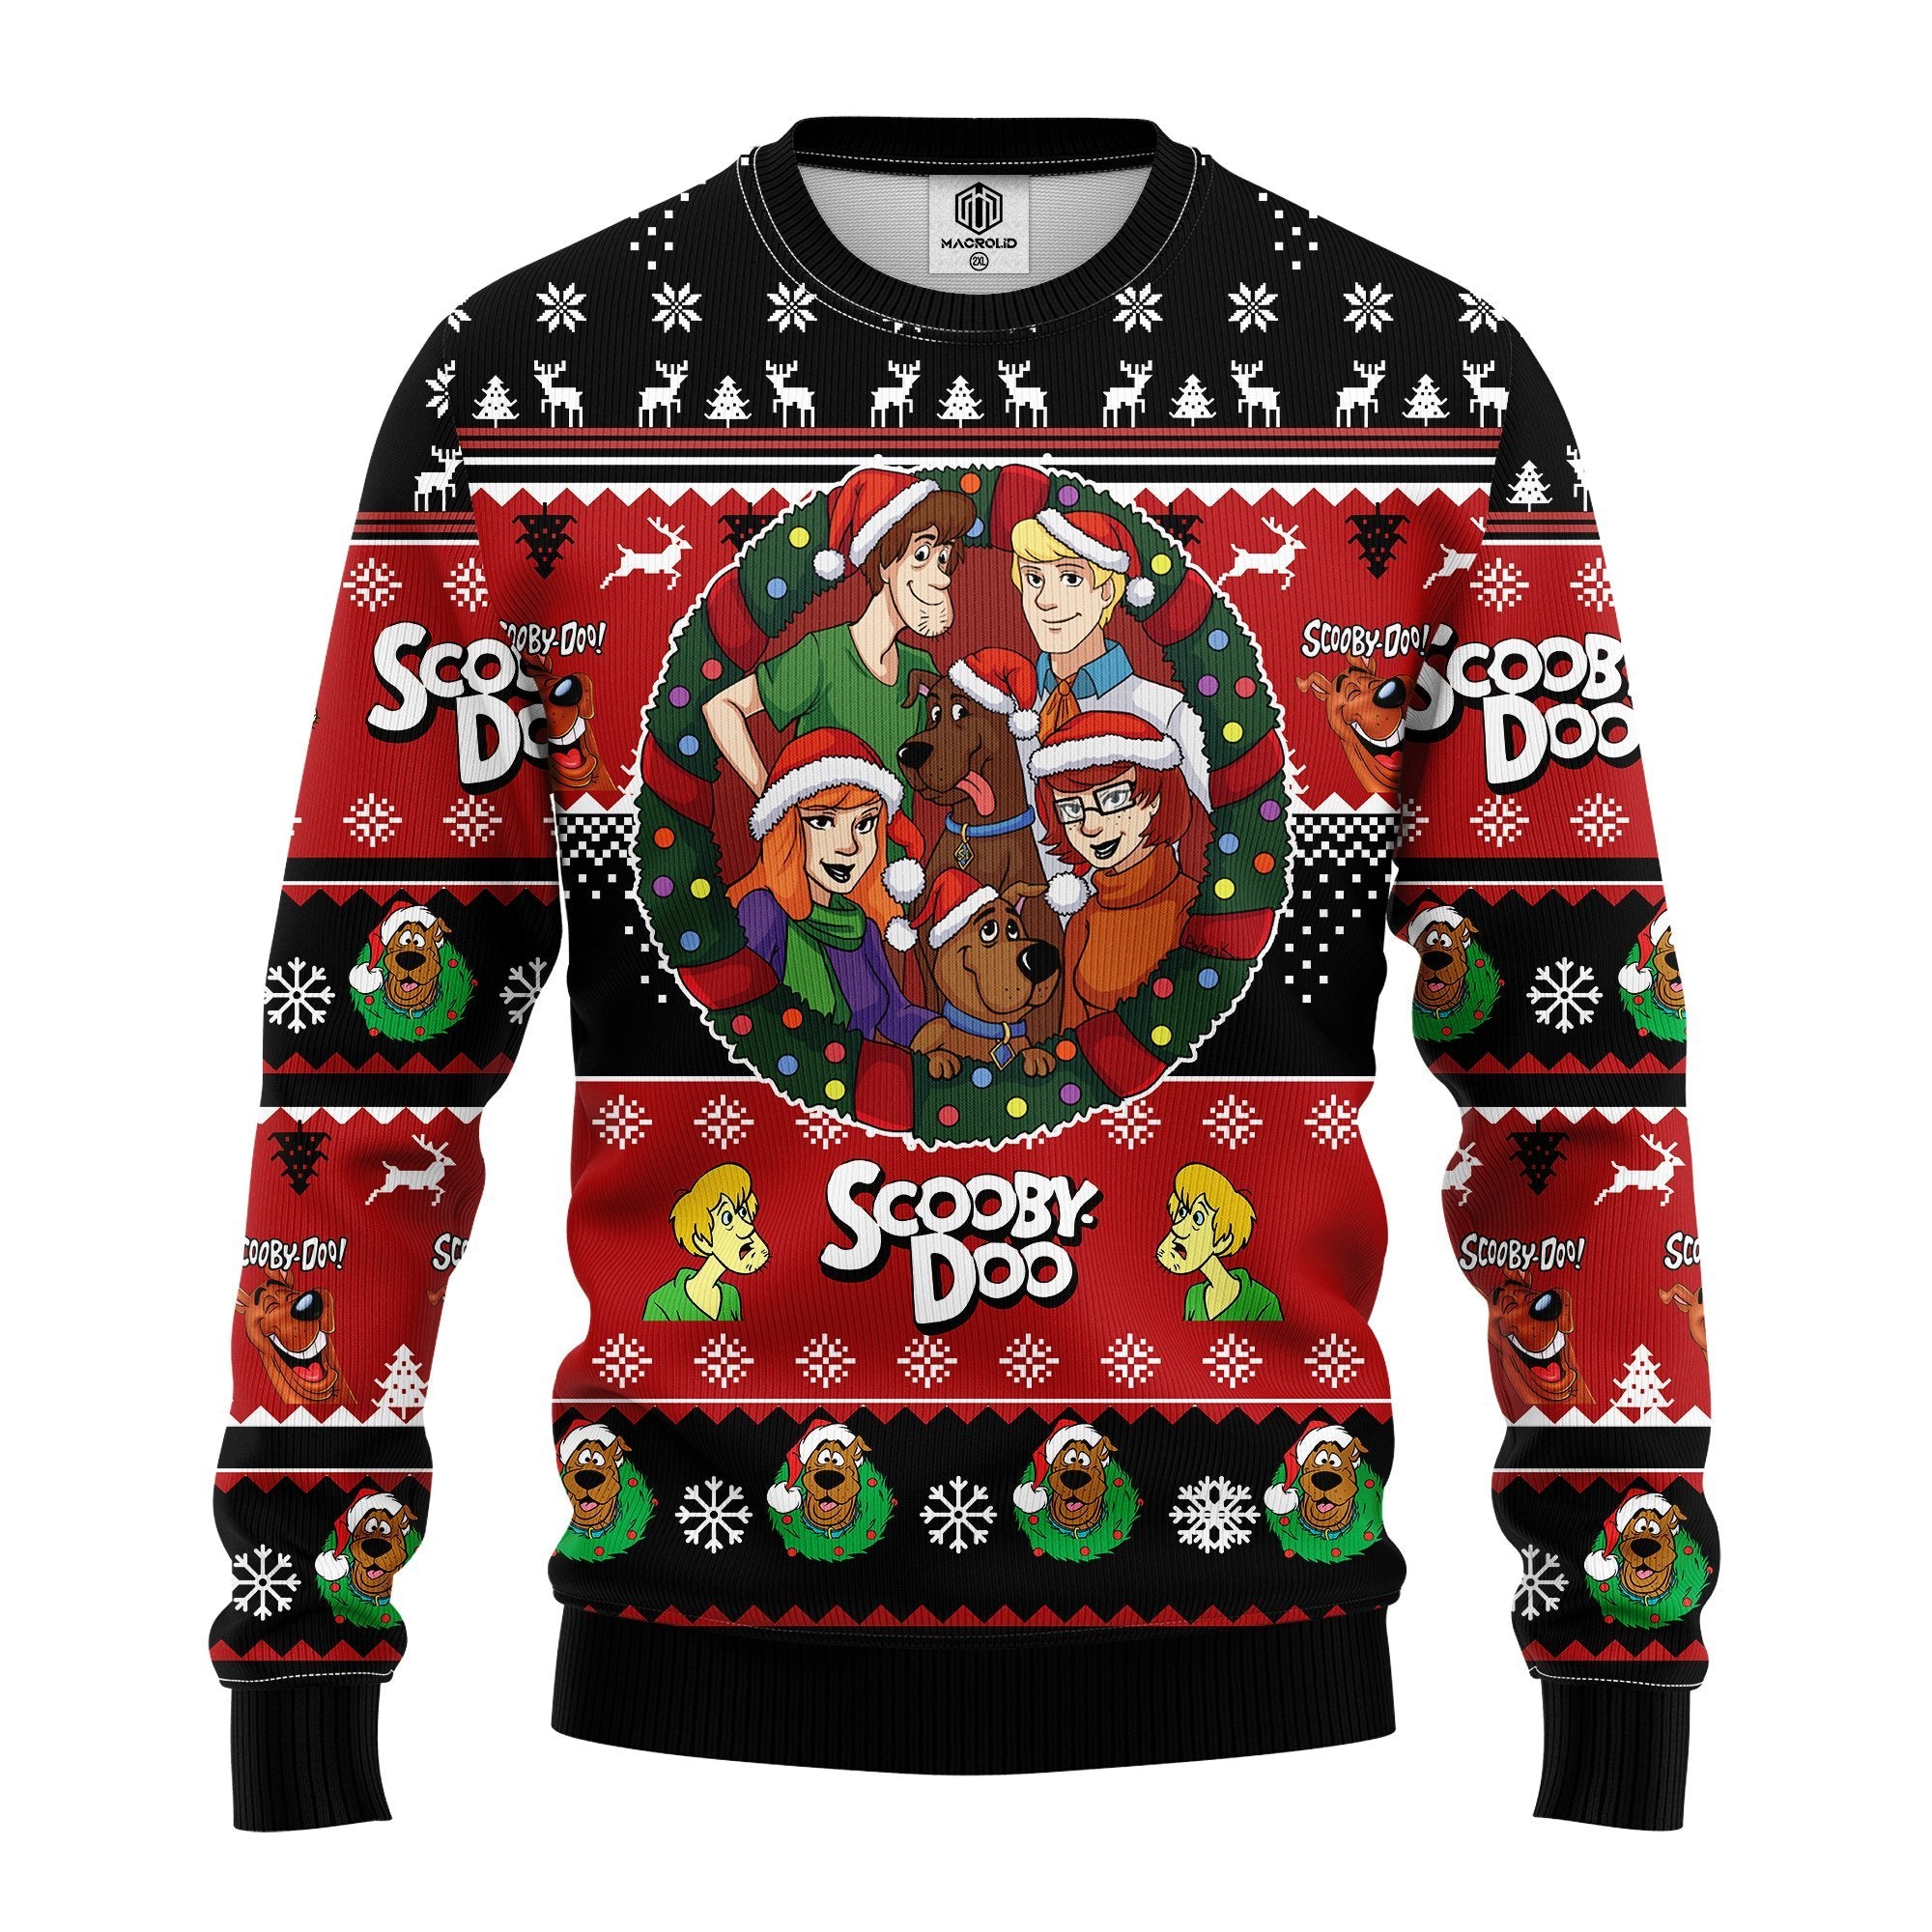 Scooby Doo 3D Ugly Christmas Sweater Amazing Gift Idea Thanksgiving Gift